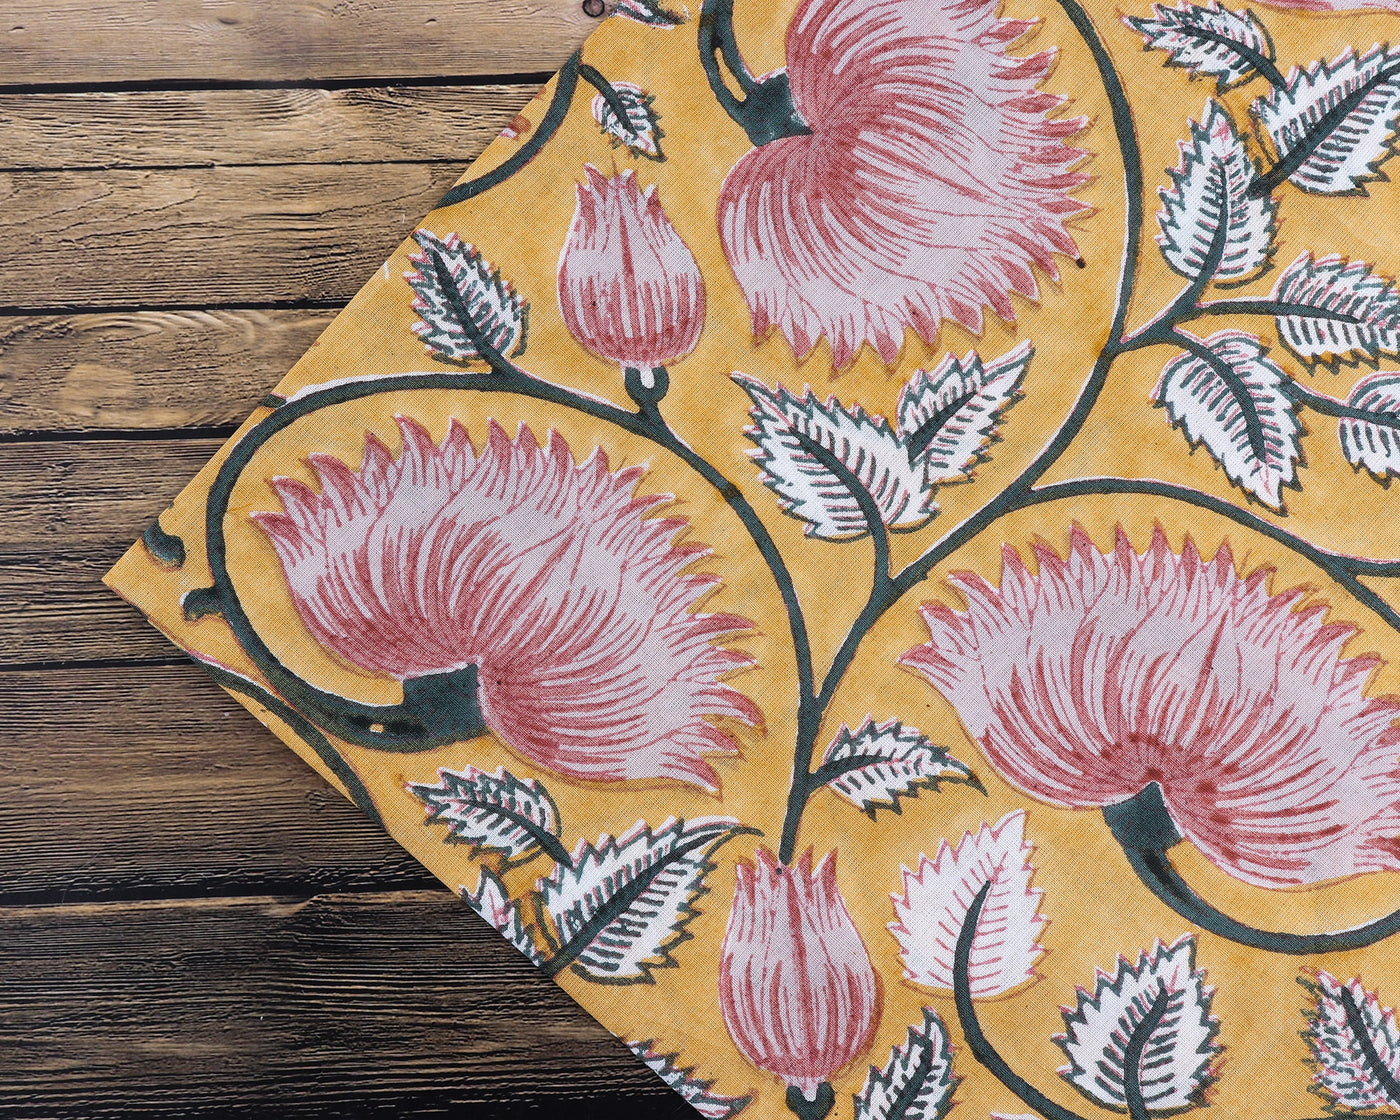 Fire Yellow, Lemonade Pink Indian Floral Hand Block Printed 100% Pure Cotton Cloth Napkins, 18x18"- Cocktail Napkins, 20x20"-  Dinner Napkins